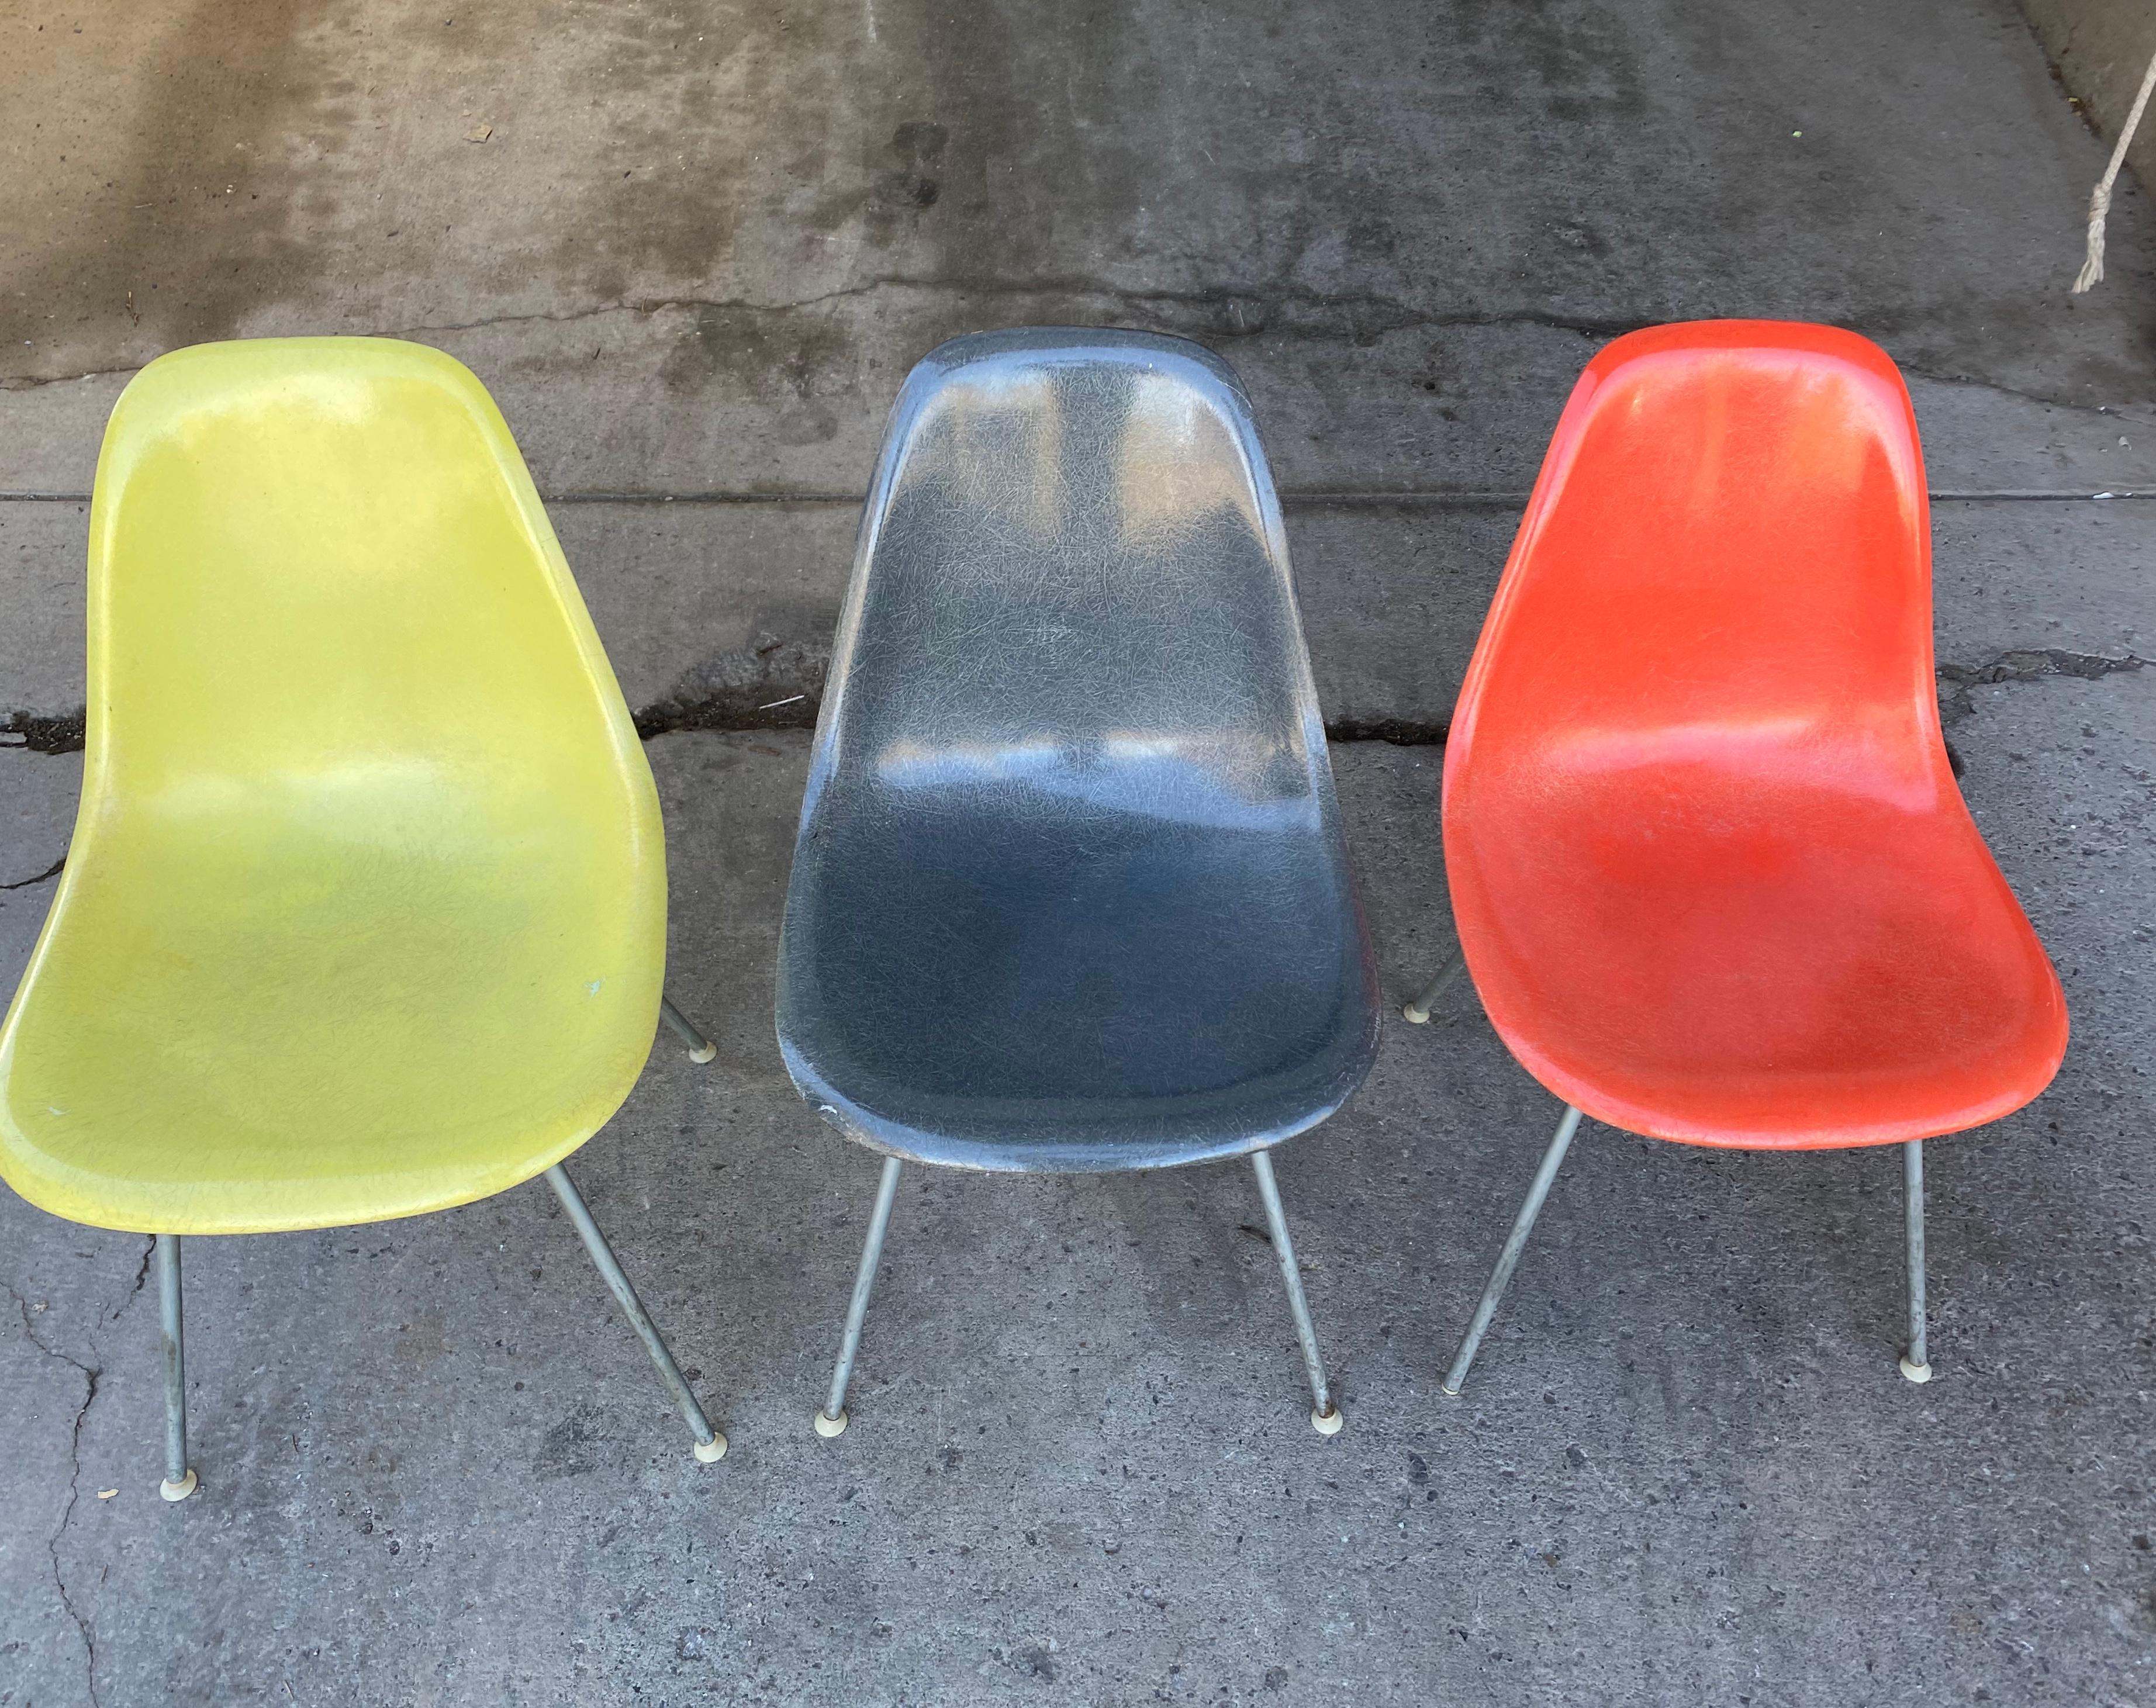 Mid-20th Century Classic Set of 4 Charles Eames Fiberglass Scoop /Side Chairs 1950s Herman Miller